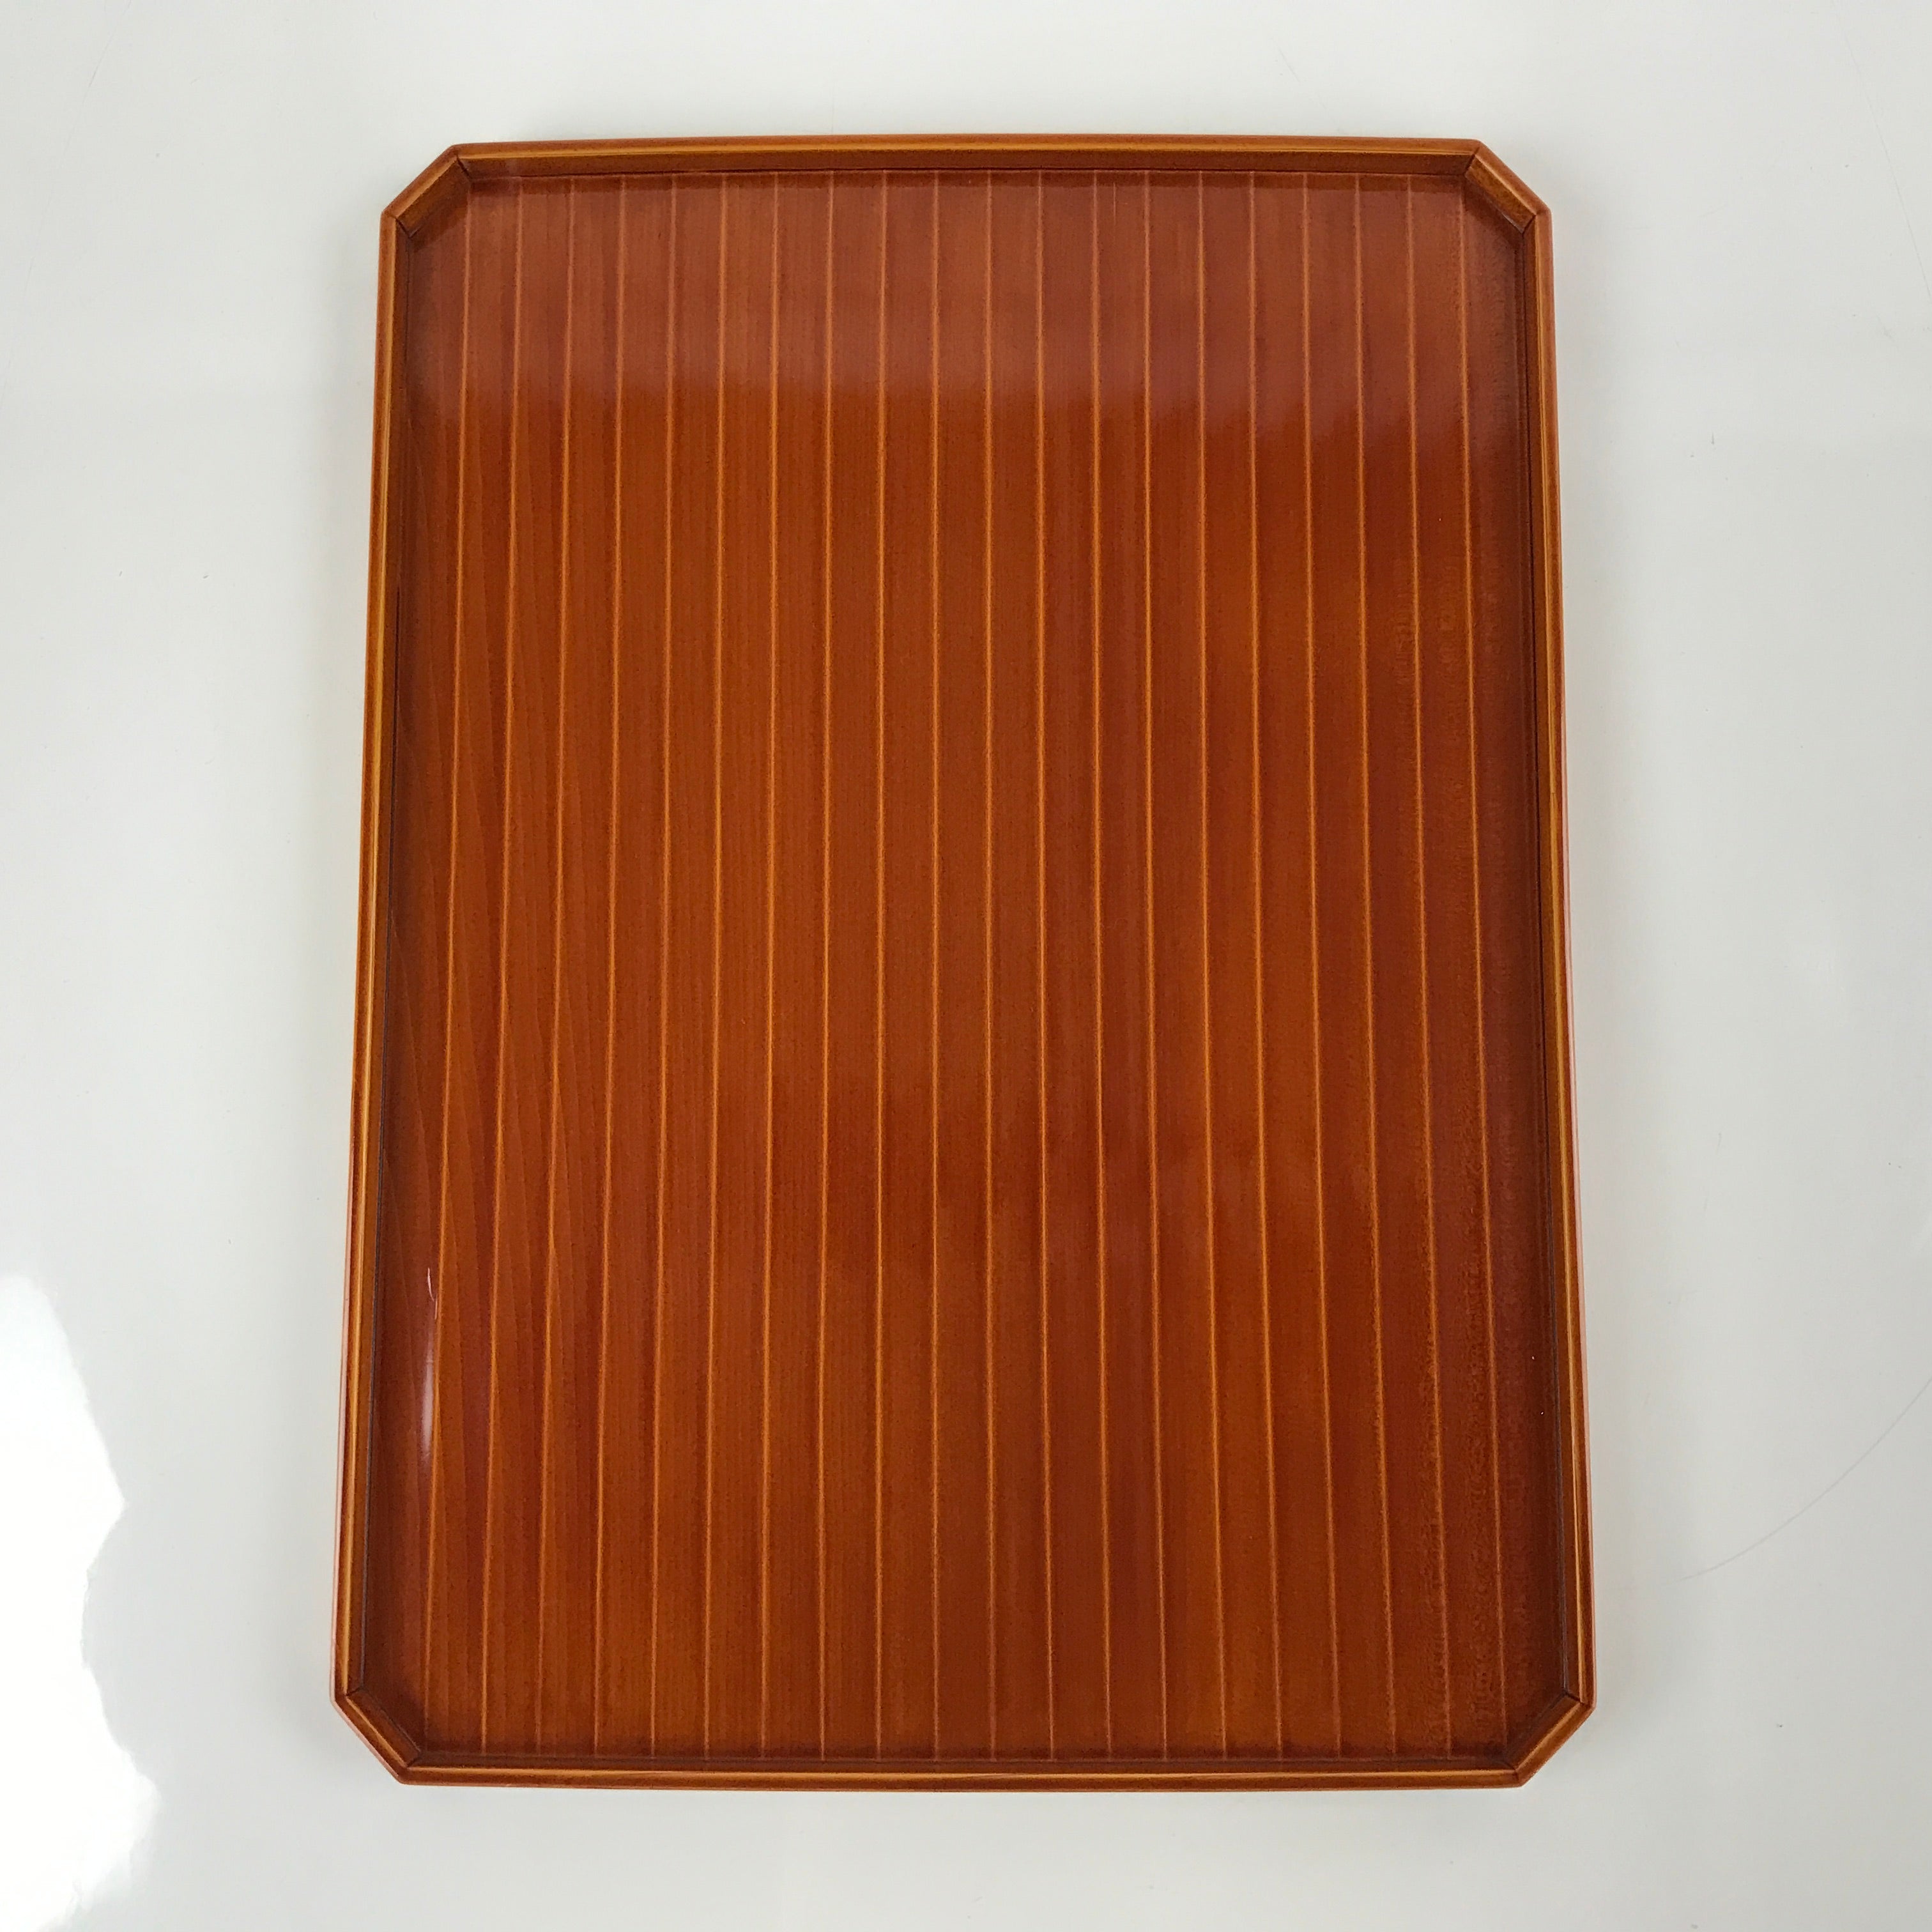 Japanese Lacquered Wood Serving Tray Vtg Hida Shunkei Obon Rectangle Brown L175